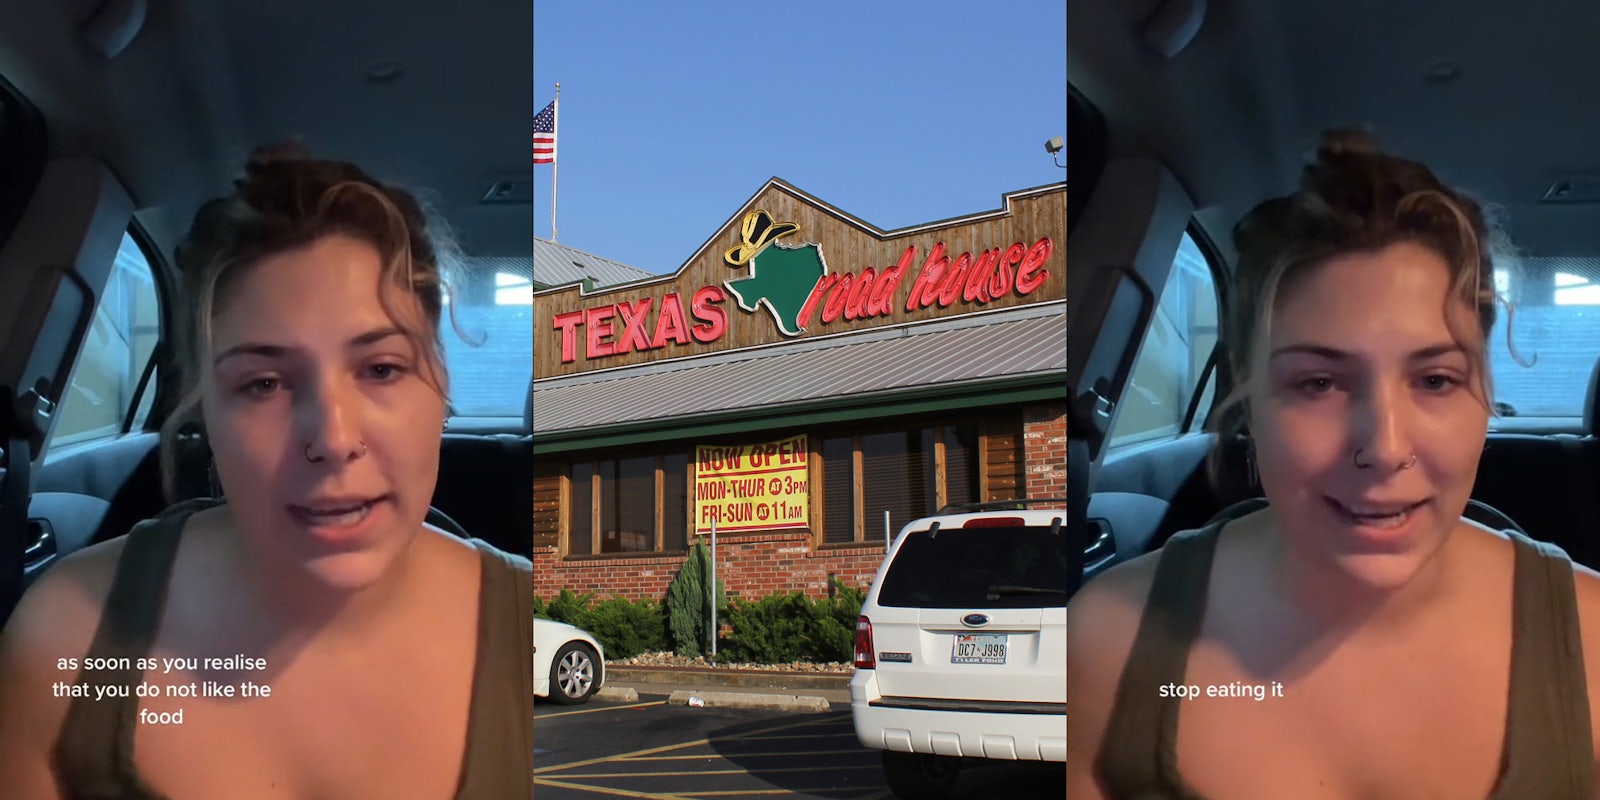 Texas Roadhouse server speaking in car with caption 'as soon as you realize that you do not like the food' (l) Texas Roadhouse building with sign (c) Texas Roadhouse server speaking in car with caption 'stop eating it' (r)